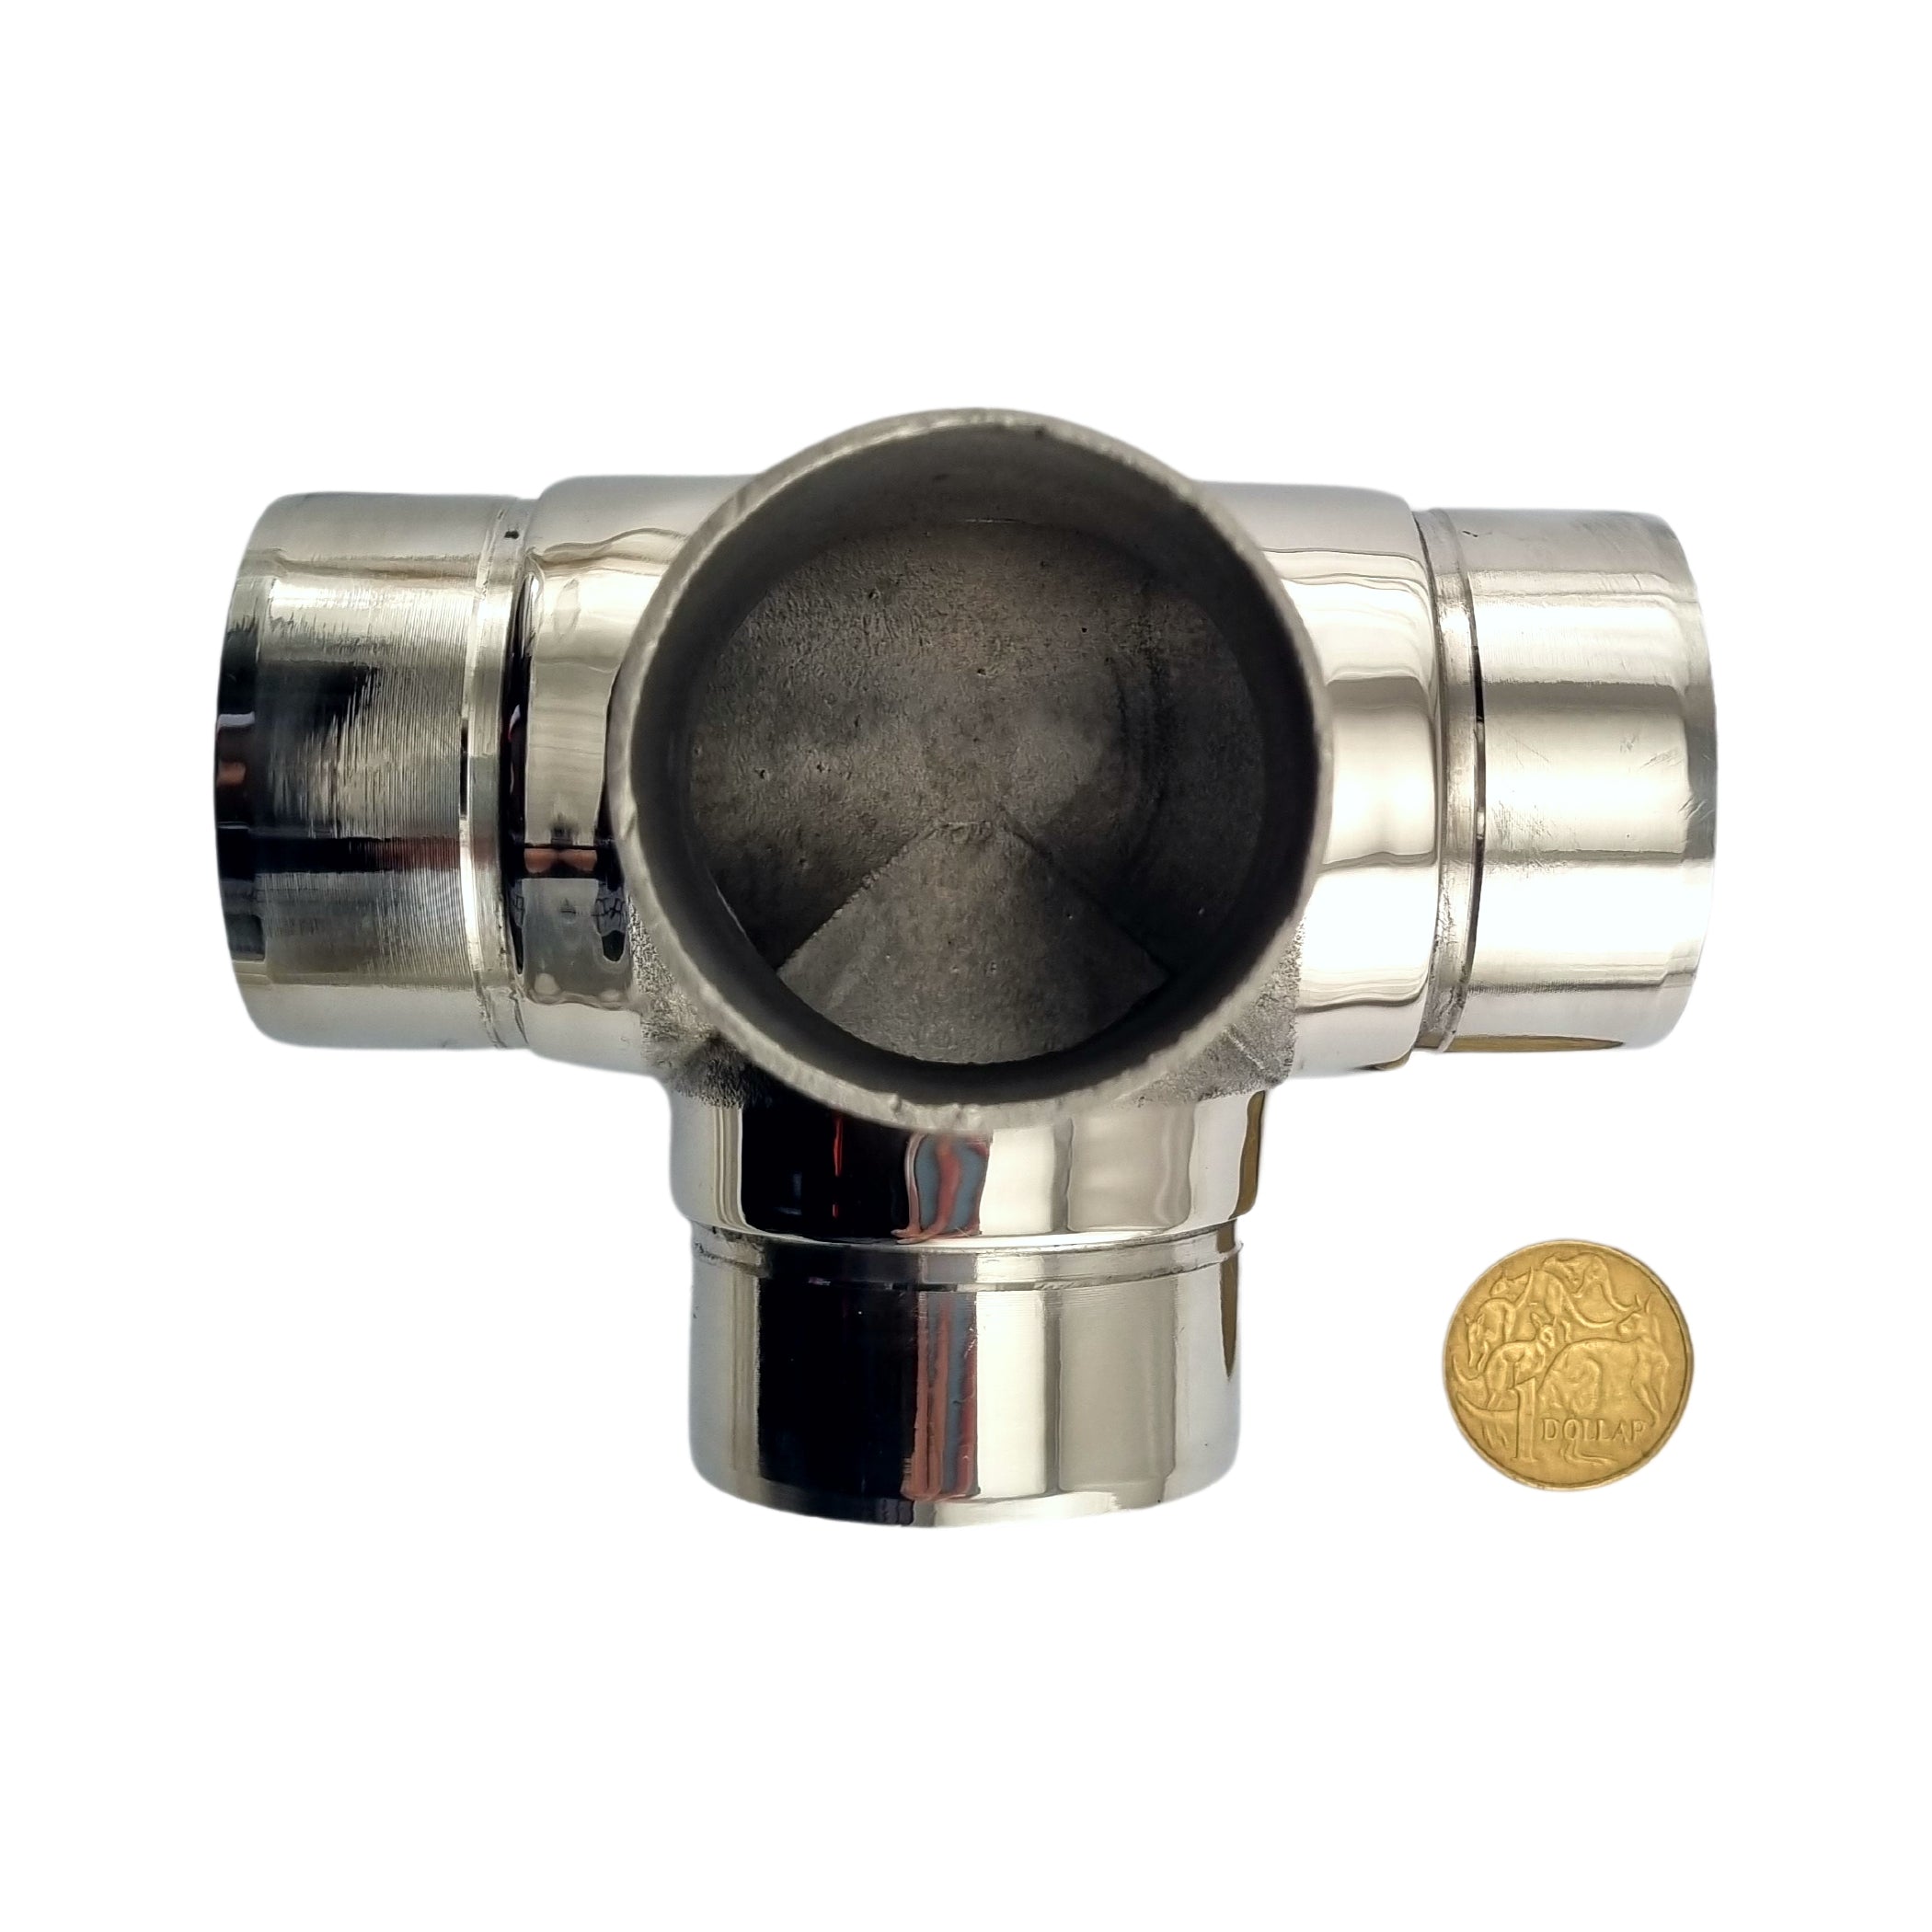 90° 4 Way Stainless Steel Rail Fitting for 50.8mm pipe. Australia wide shipping. Shop: chain.com.au